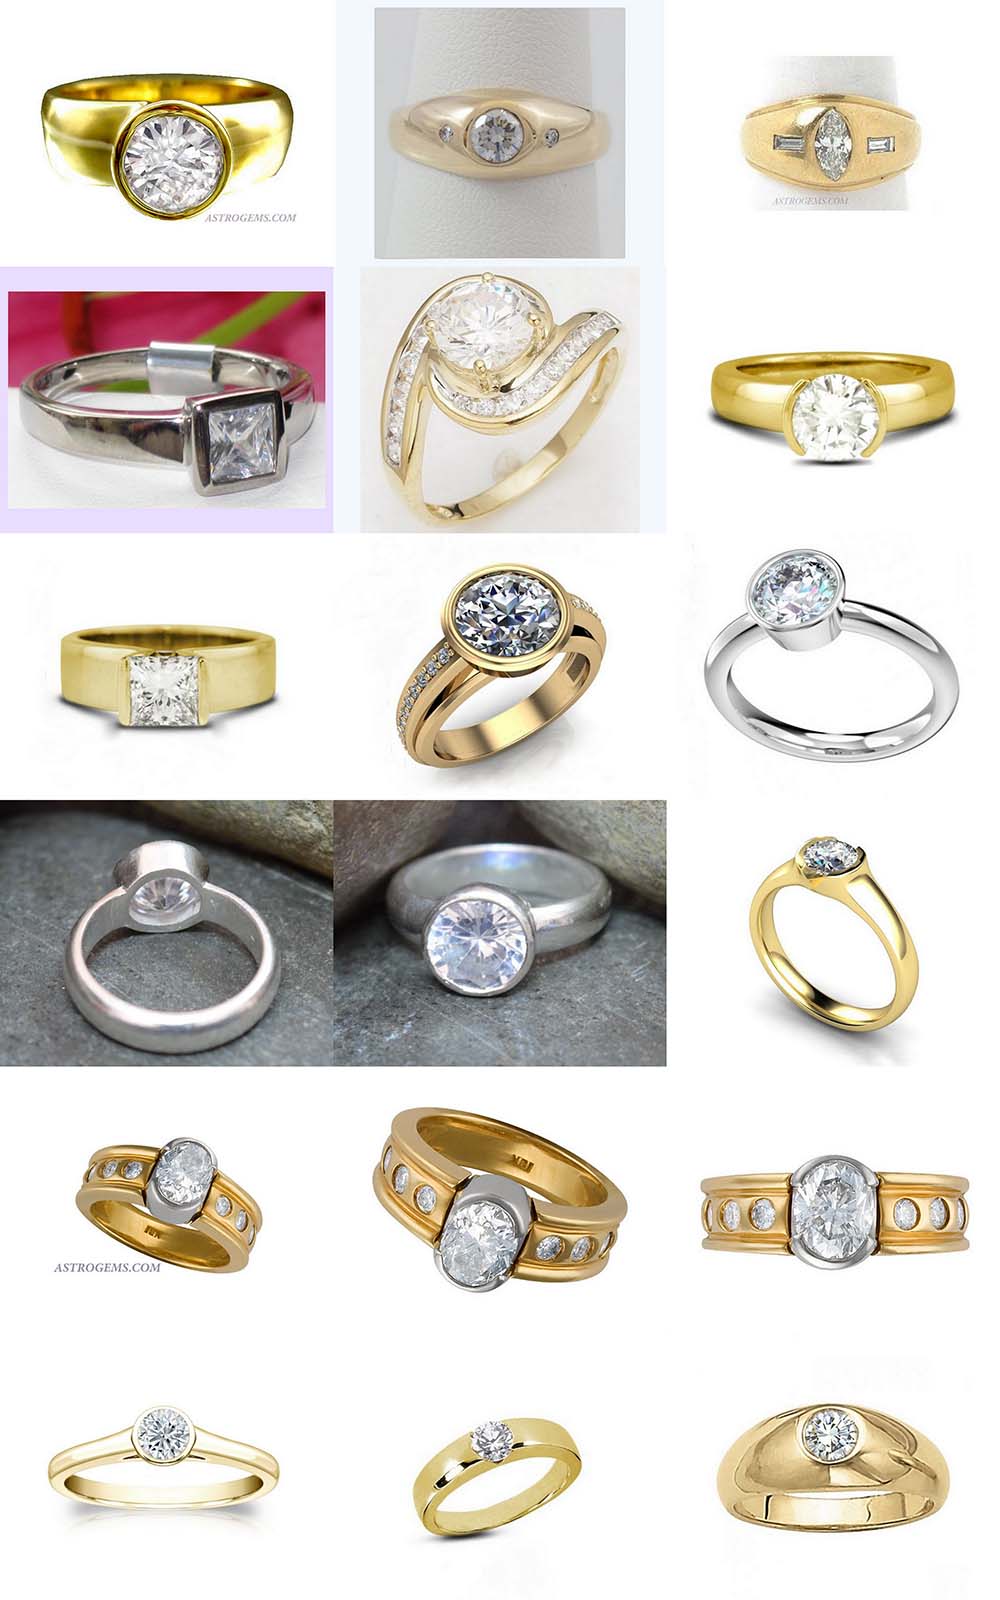 Astrogems can make jyotish astrological diamond rings in any style.